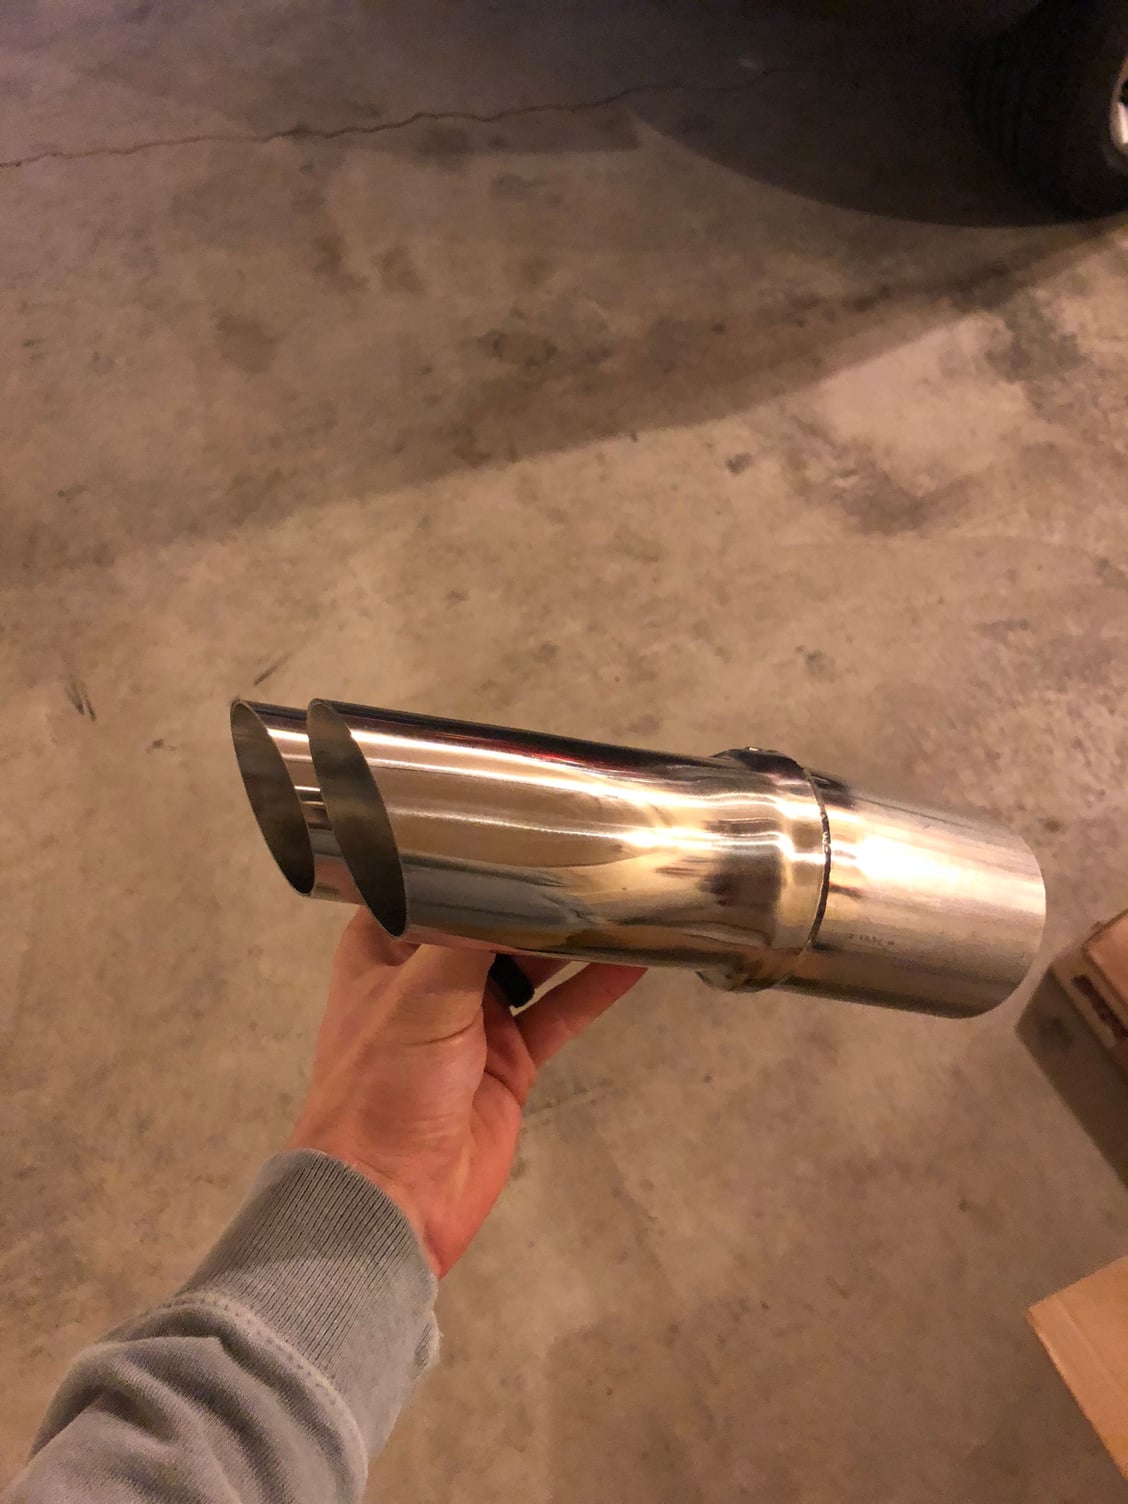  - NEW exhaust tips (quads) - Jefferson City, MO 65109, United States